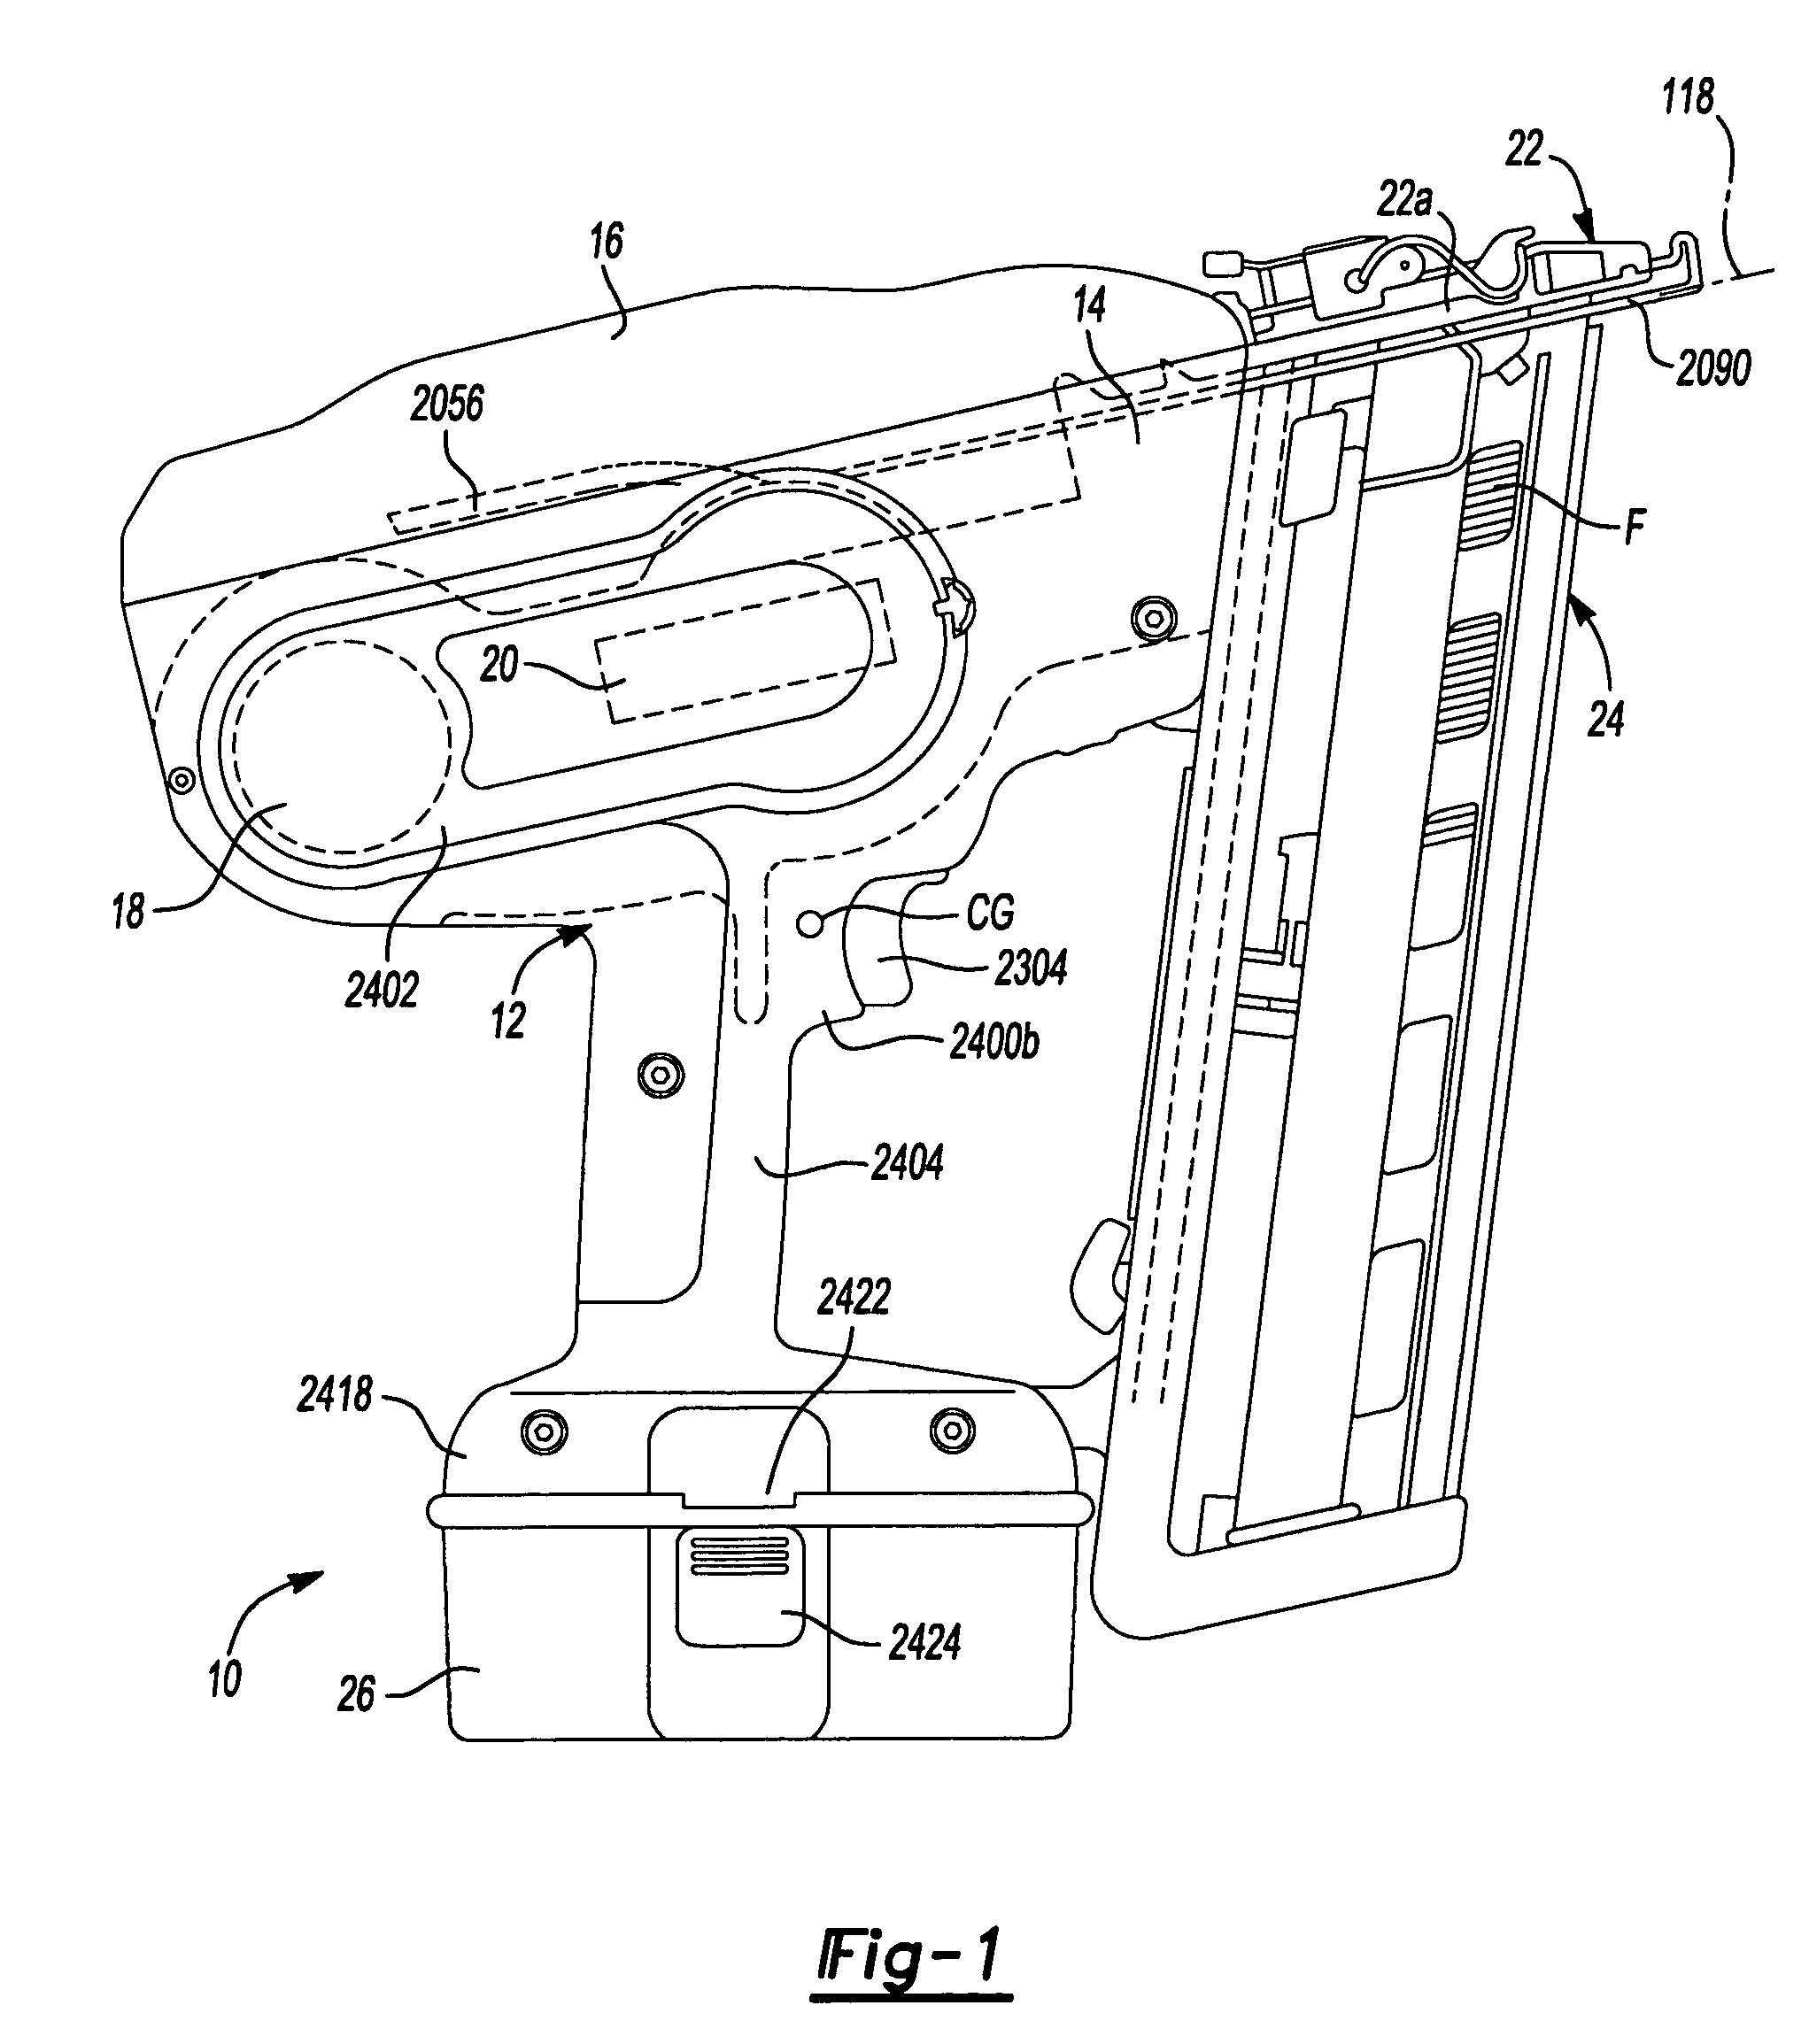 Activation arm assembly method